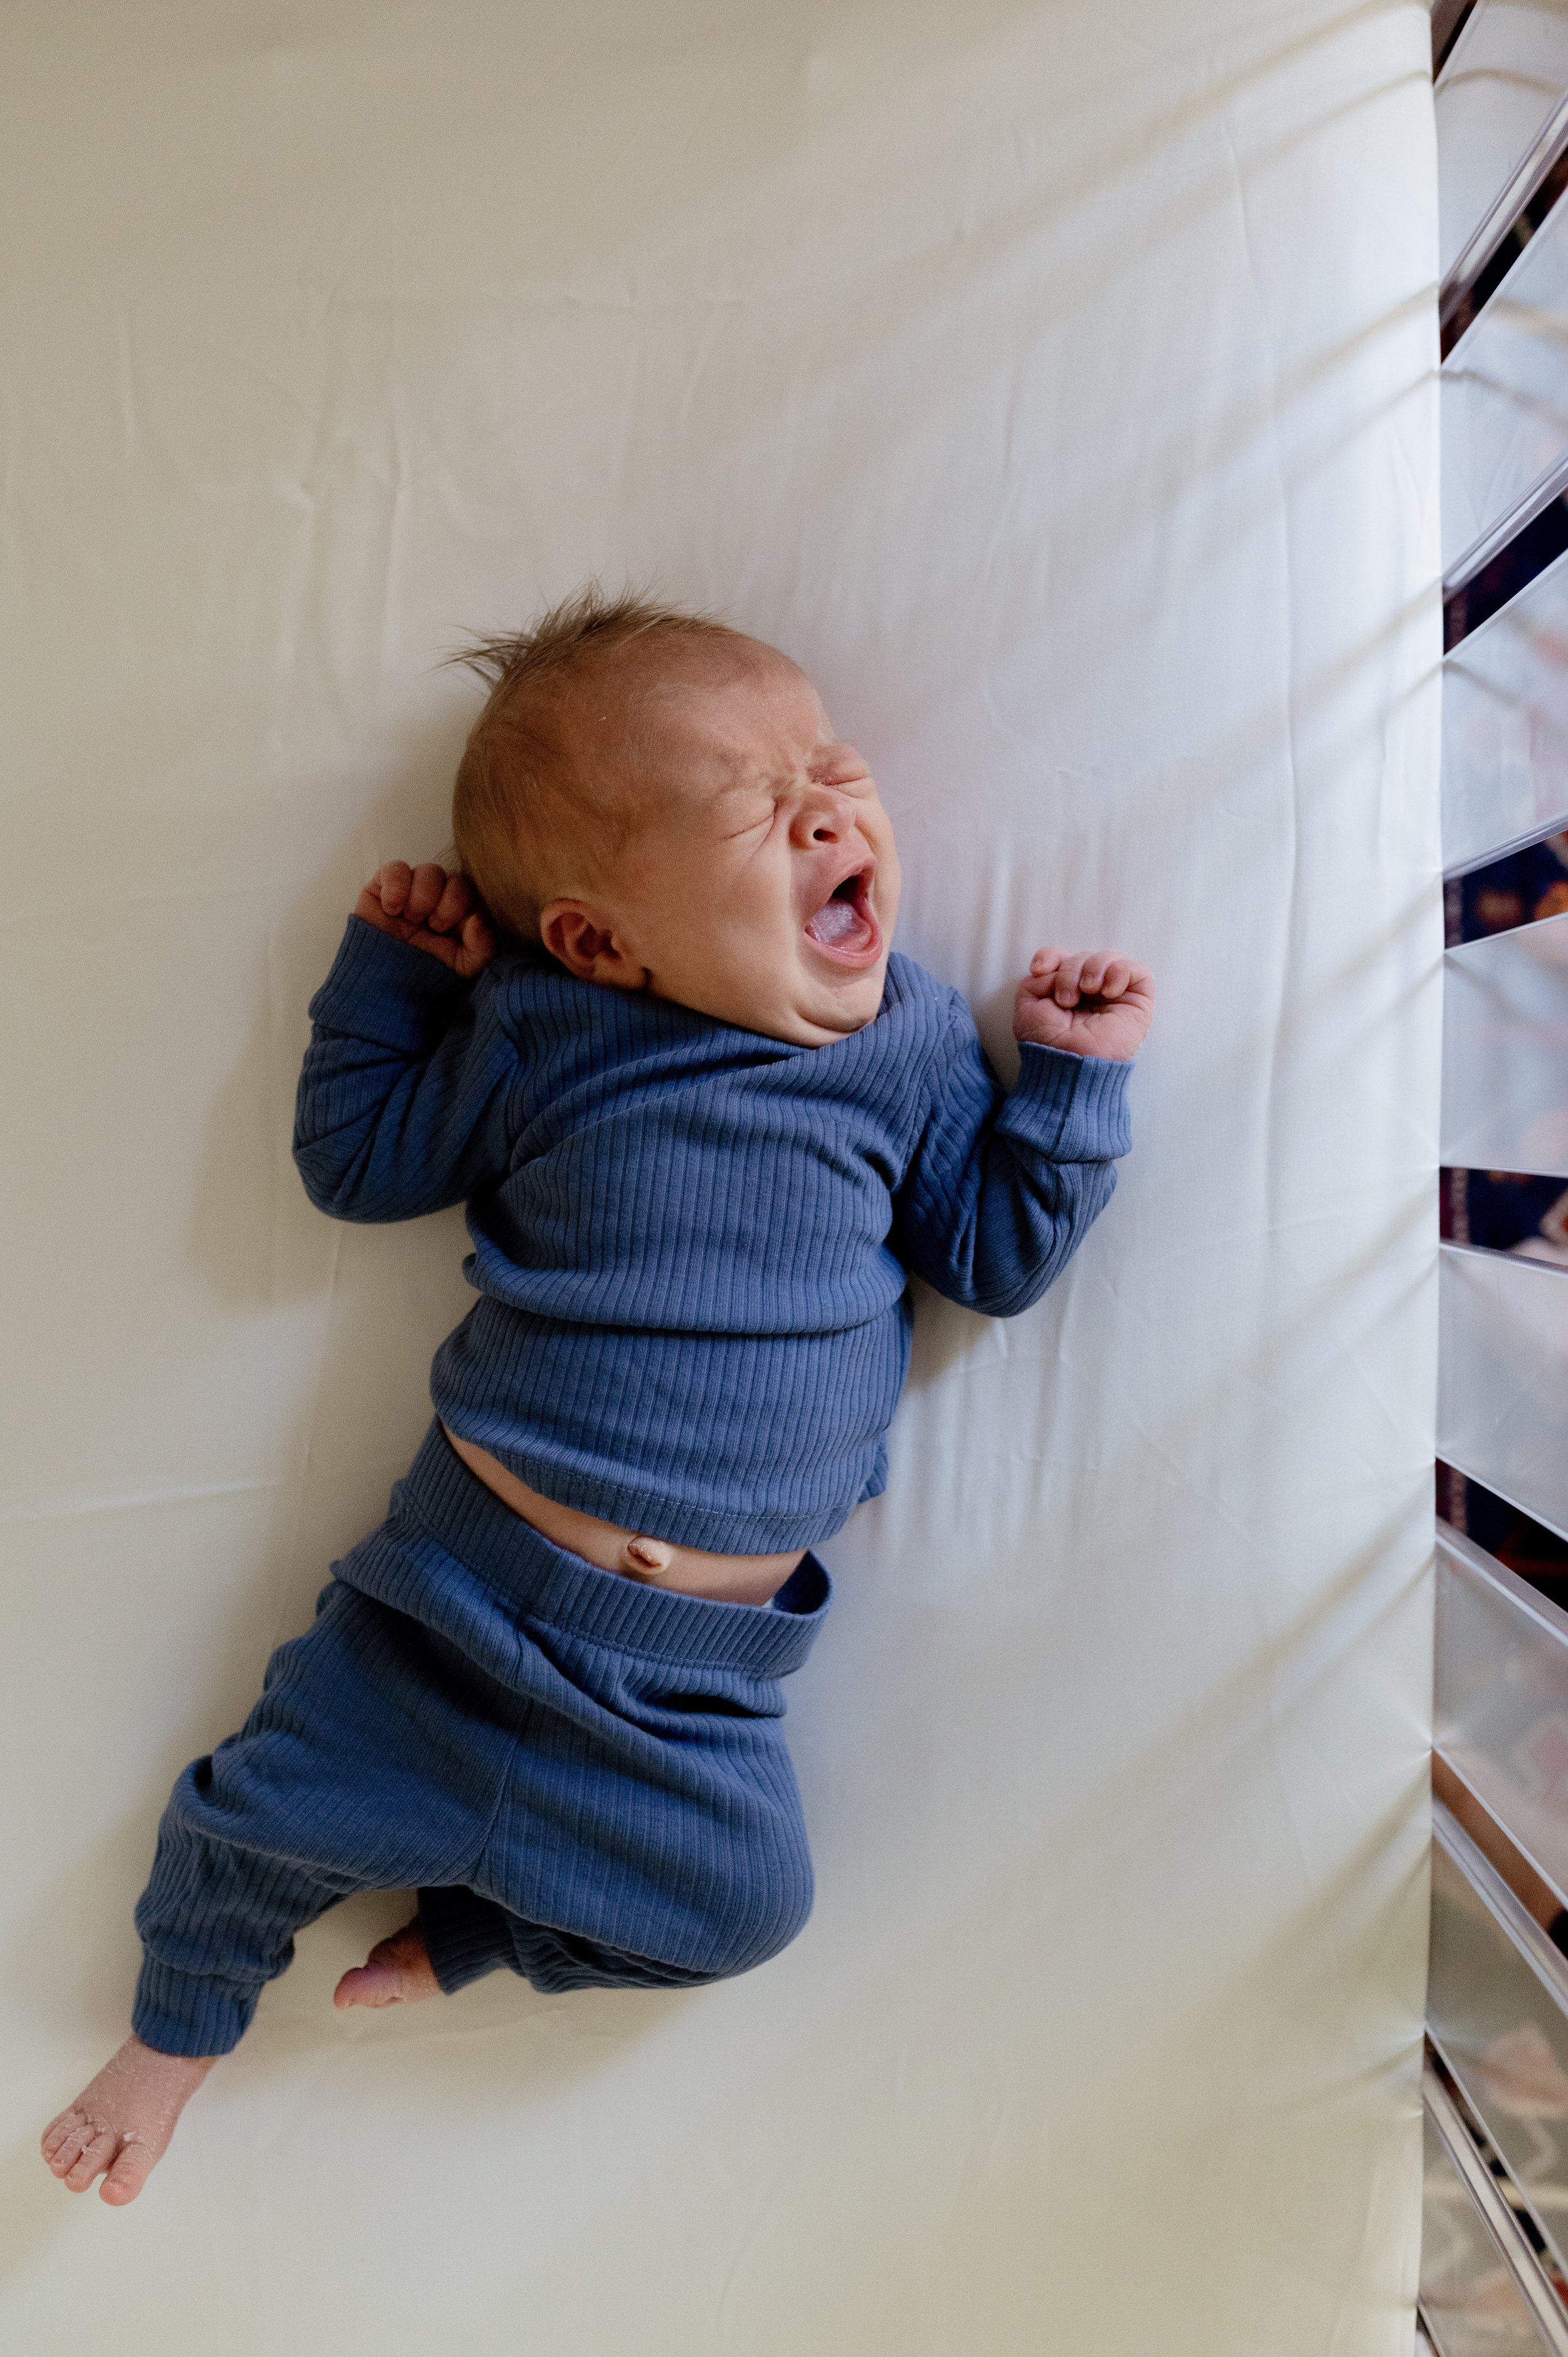 Baby in blue outfit yawns in crib